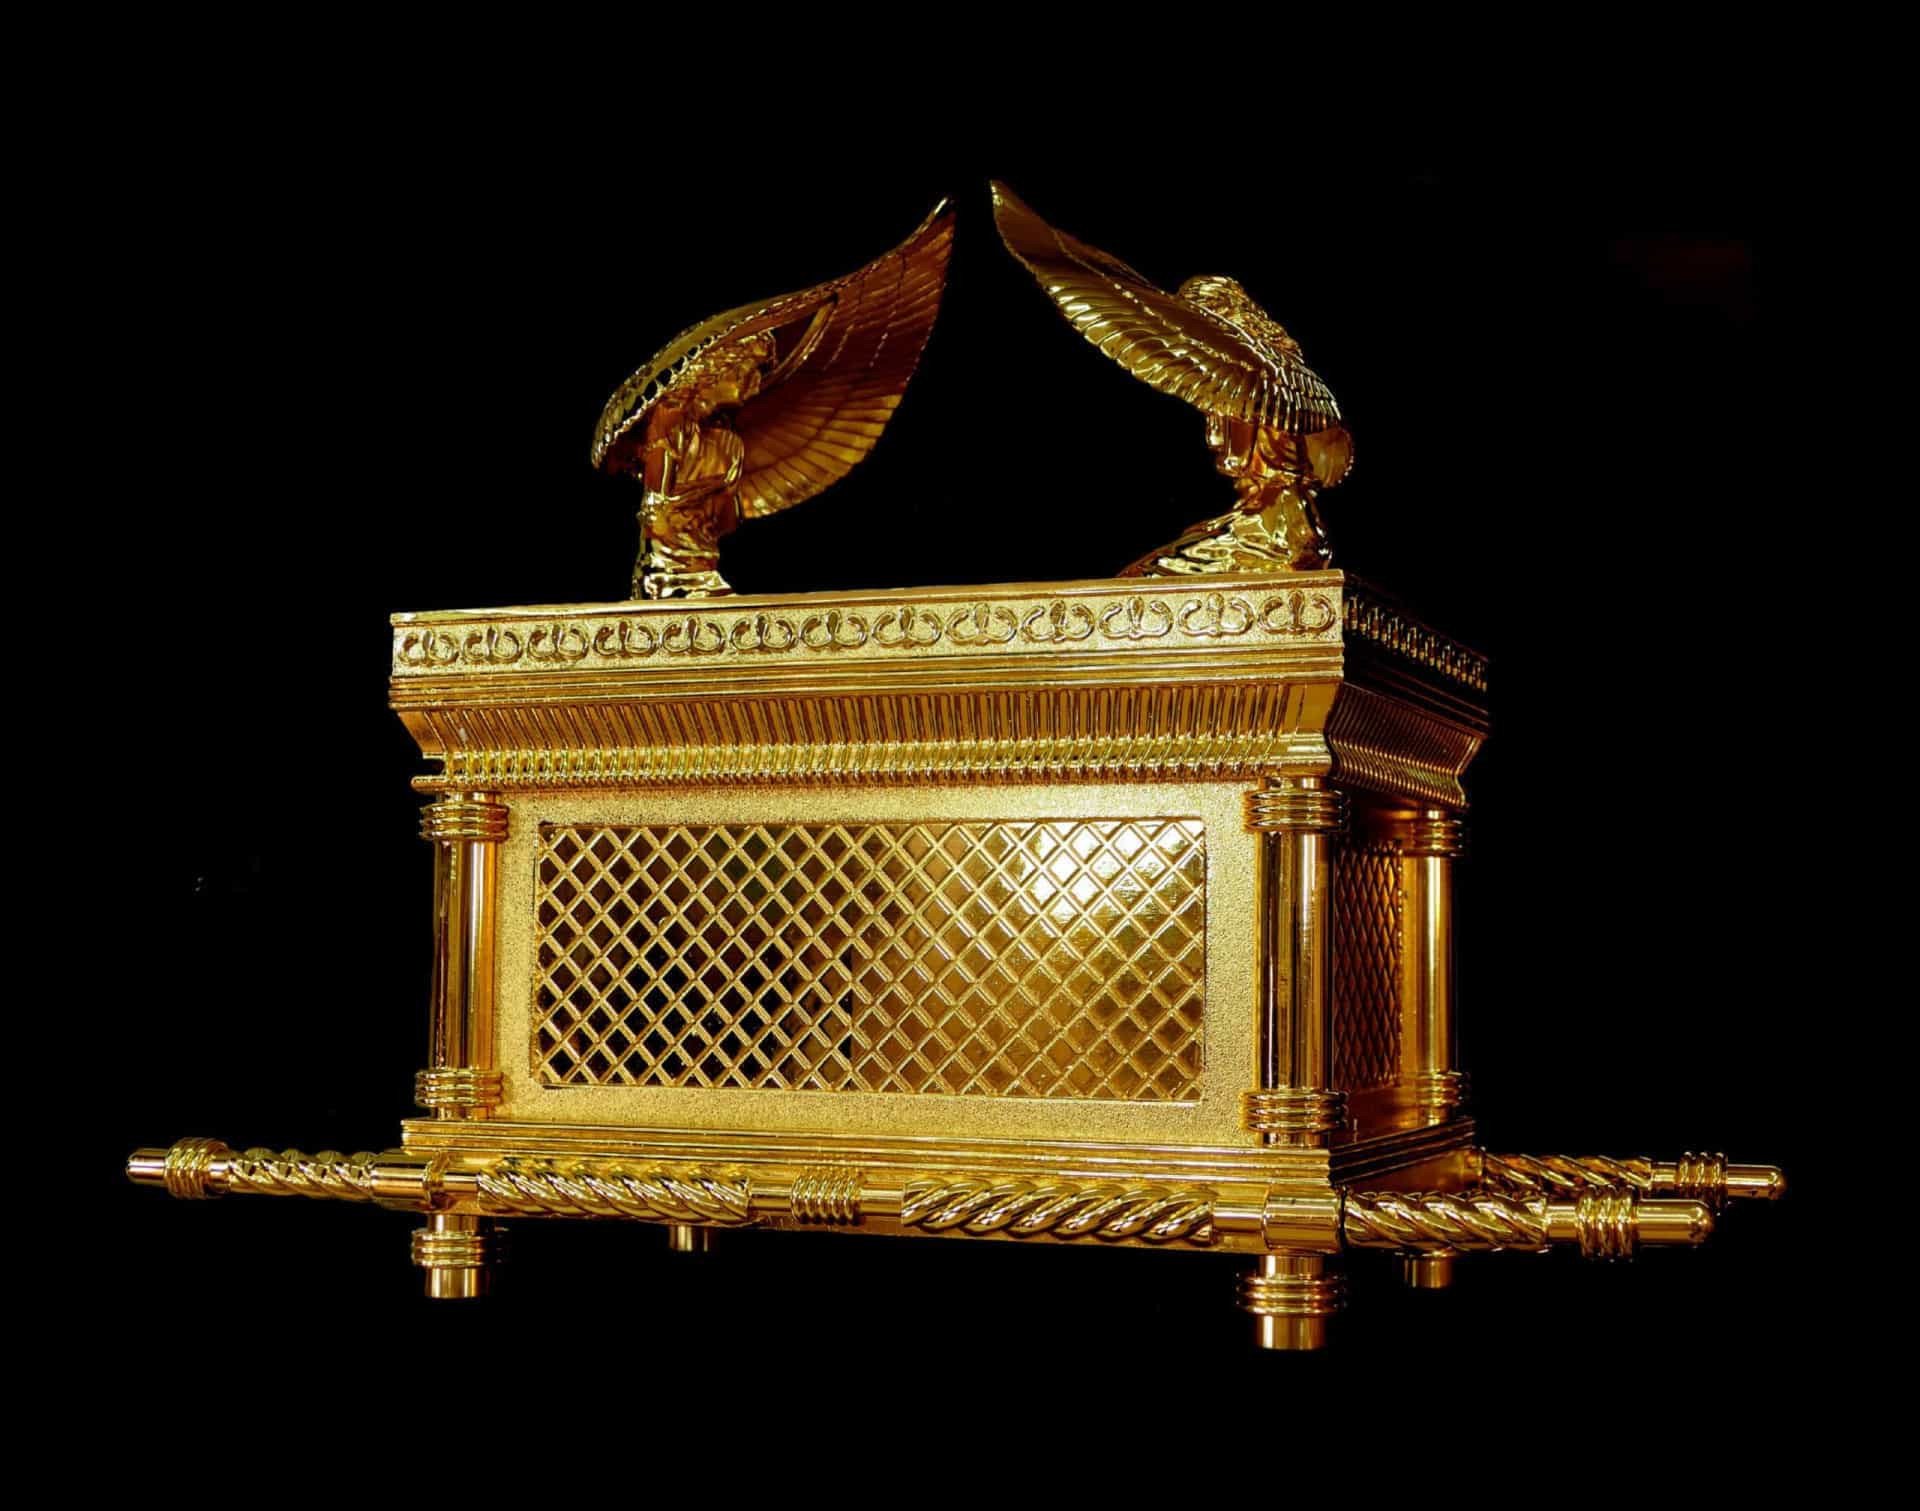 <p>The Ark of the Covenant remains one of history's enduring mysteries. It's certainly one of <a href="https://www.starsinsider.com/travel/440769/lost-cities-found-unearthing-the-civilizations-of-old" rel="noopener">archaeology</a>'s most perplexing puzzles. Did this gold-plated wooden box said to house the stone tablets on which the Ten Commandments were written ever exist? If so, what happened to it? And where might this legendary artifact be hidden?</p> <p>Click through the following gallery and learn more about the lost Ark by following this historic timeline.</p><p>You may also like:<a href="https://www.starsinsider.com/n/220484?utm_source=msn.com&utm_medium=display&utm_campaign=referral_description&utm_content=452739v7en-ph"> Meet the world's most heinous cannibals </a></p>